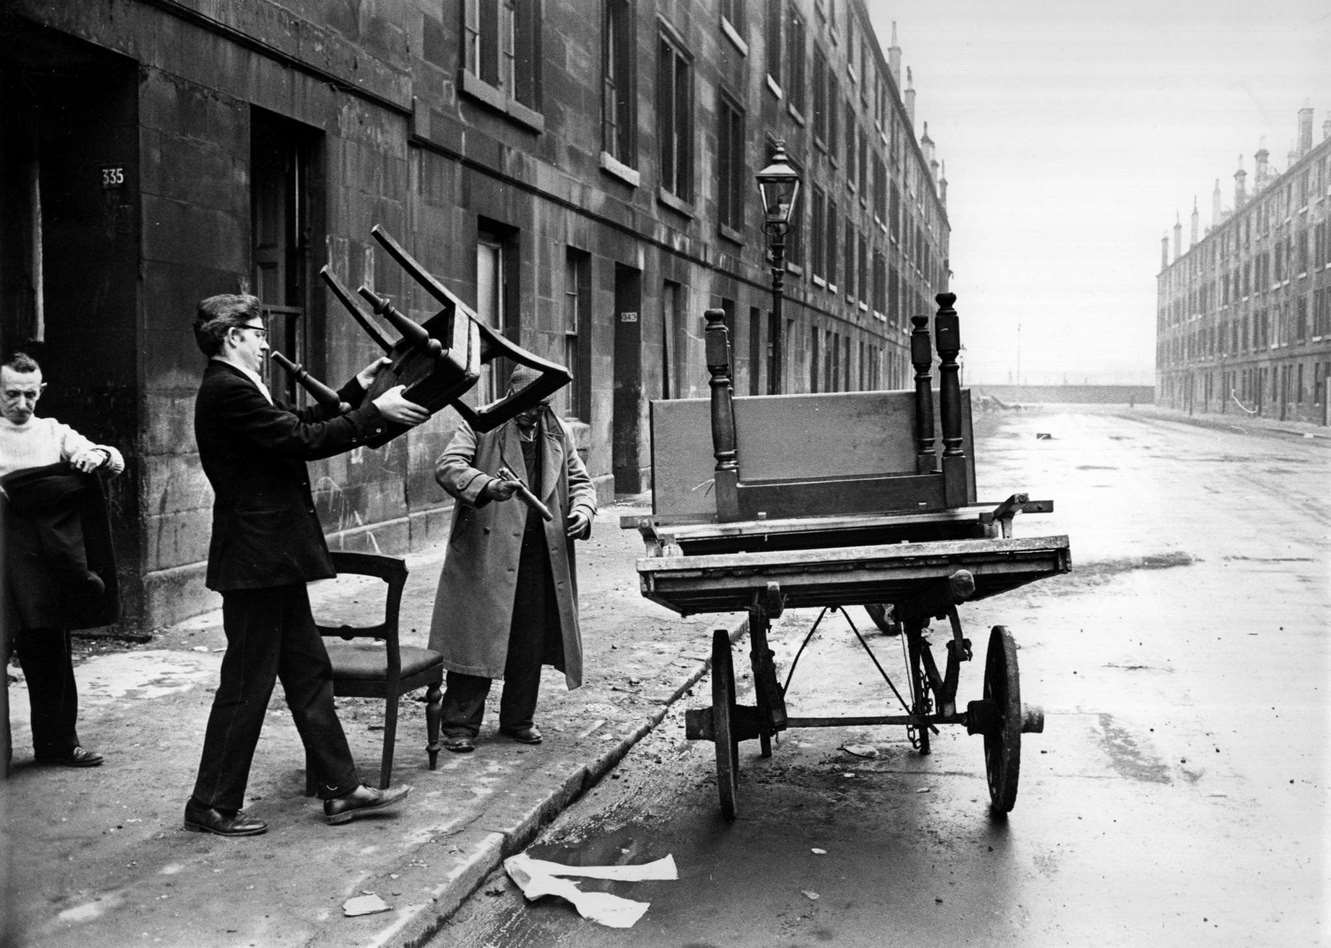 A man piling furniture onto a cart in a street of soon-to-be-demolished tenements in the Gorbals area of Glasgow, 1960